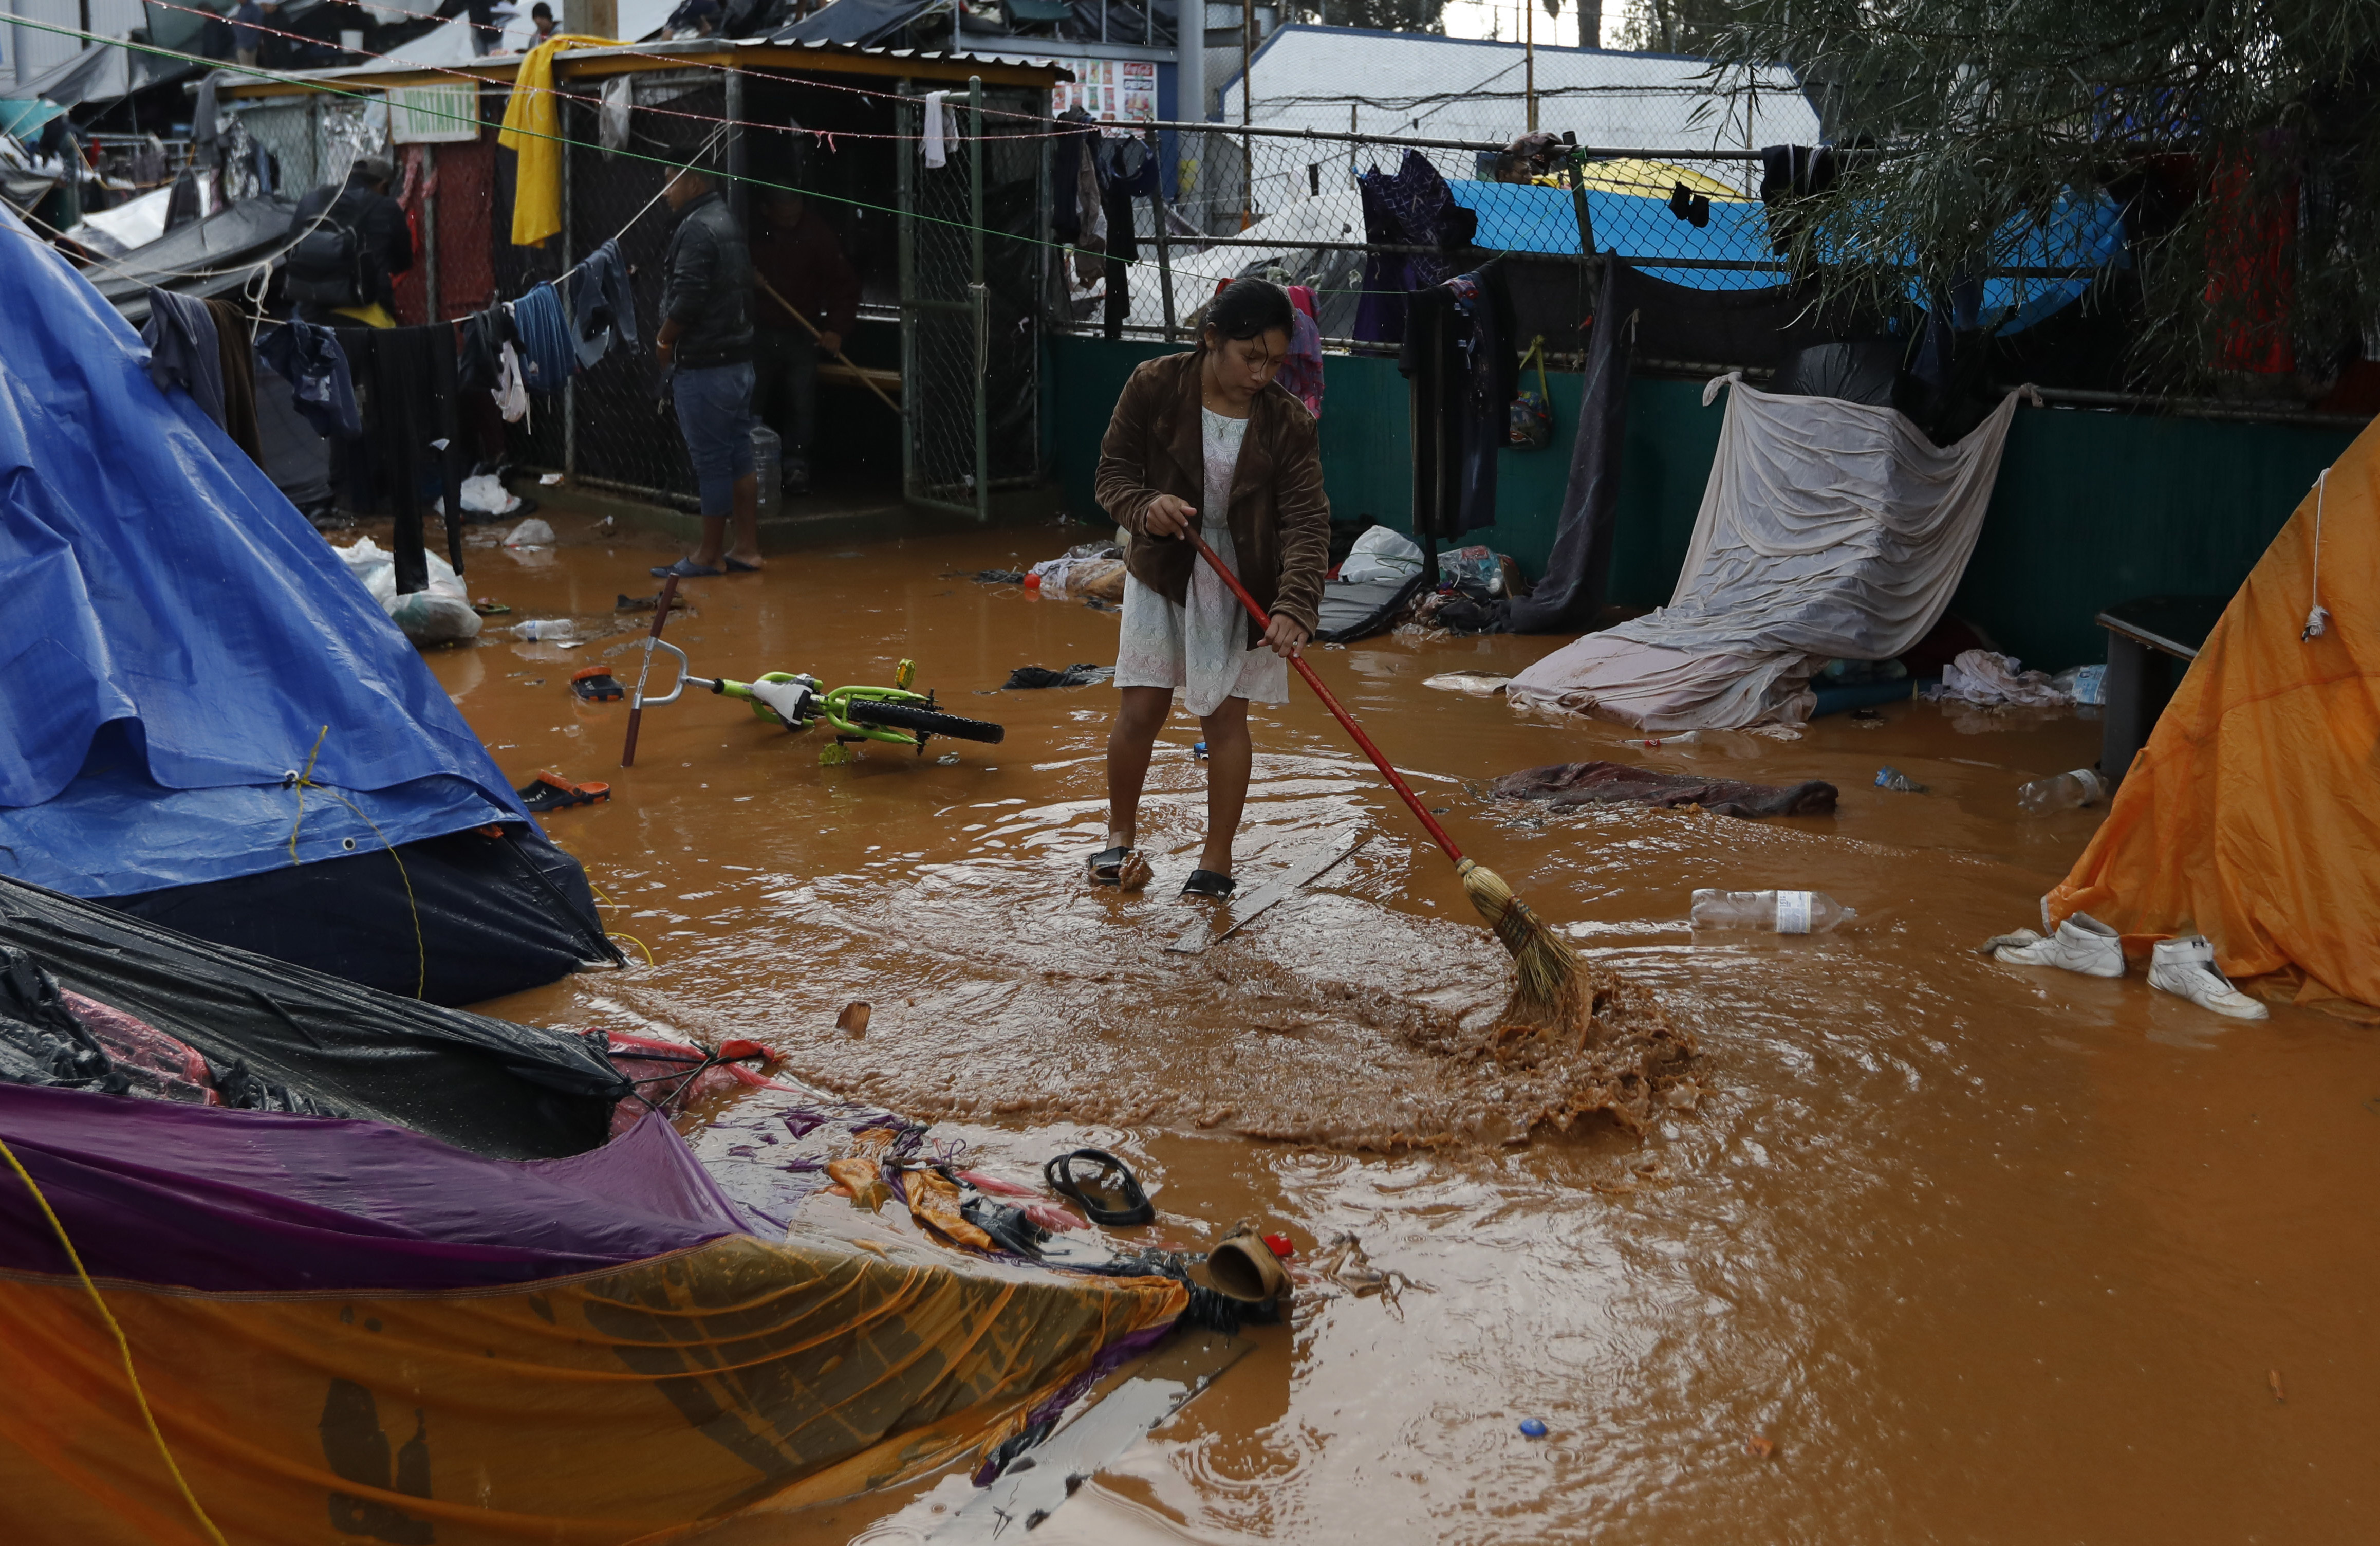 A woman attempts to sweep away flood waters, between bouts of heavy rain at a sports complex sheltering thousands of Central Americans in Tijuana, Mexico, Thursday, Nov. 29, 2018. Aid workers and humanitarian organizations expressed concerns Thursday about the unsanitary conditions at the sports complex in Tijuana where more than 6,000 Central American migrants are packed into a space adequate for half that many people and where lice infestations and respiratory infections are rampant.(AP Photo/Rebecca Blackwell)